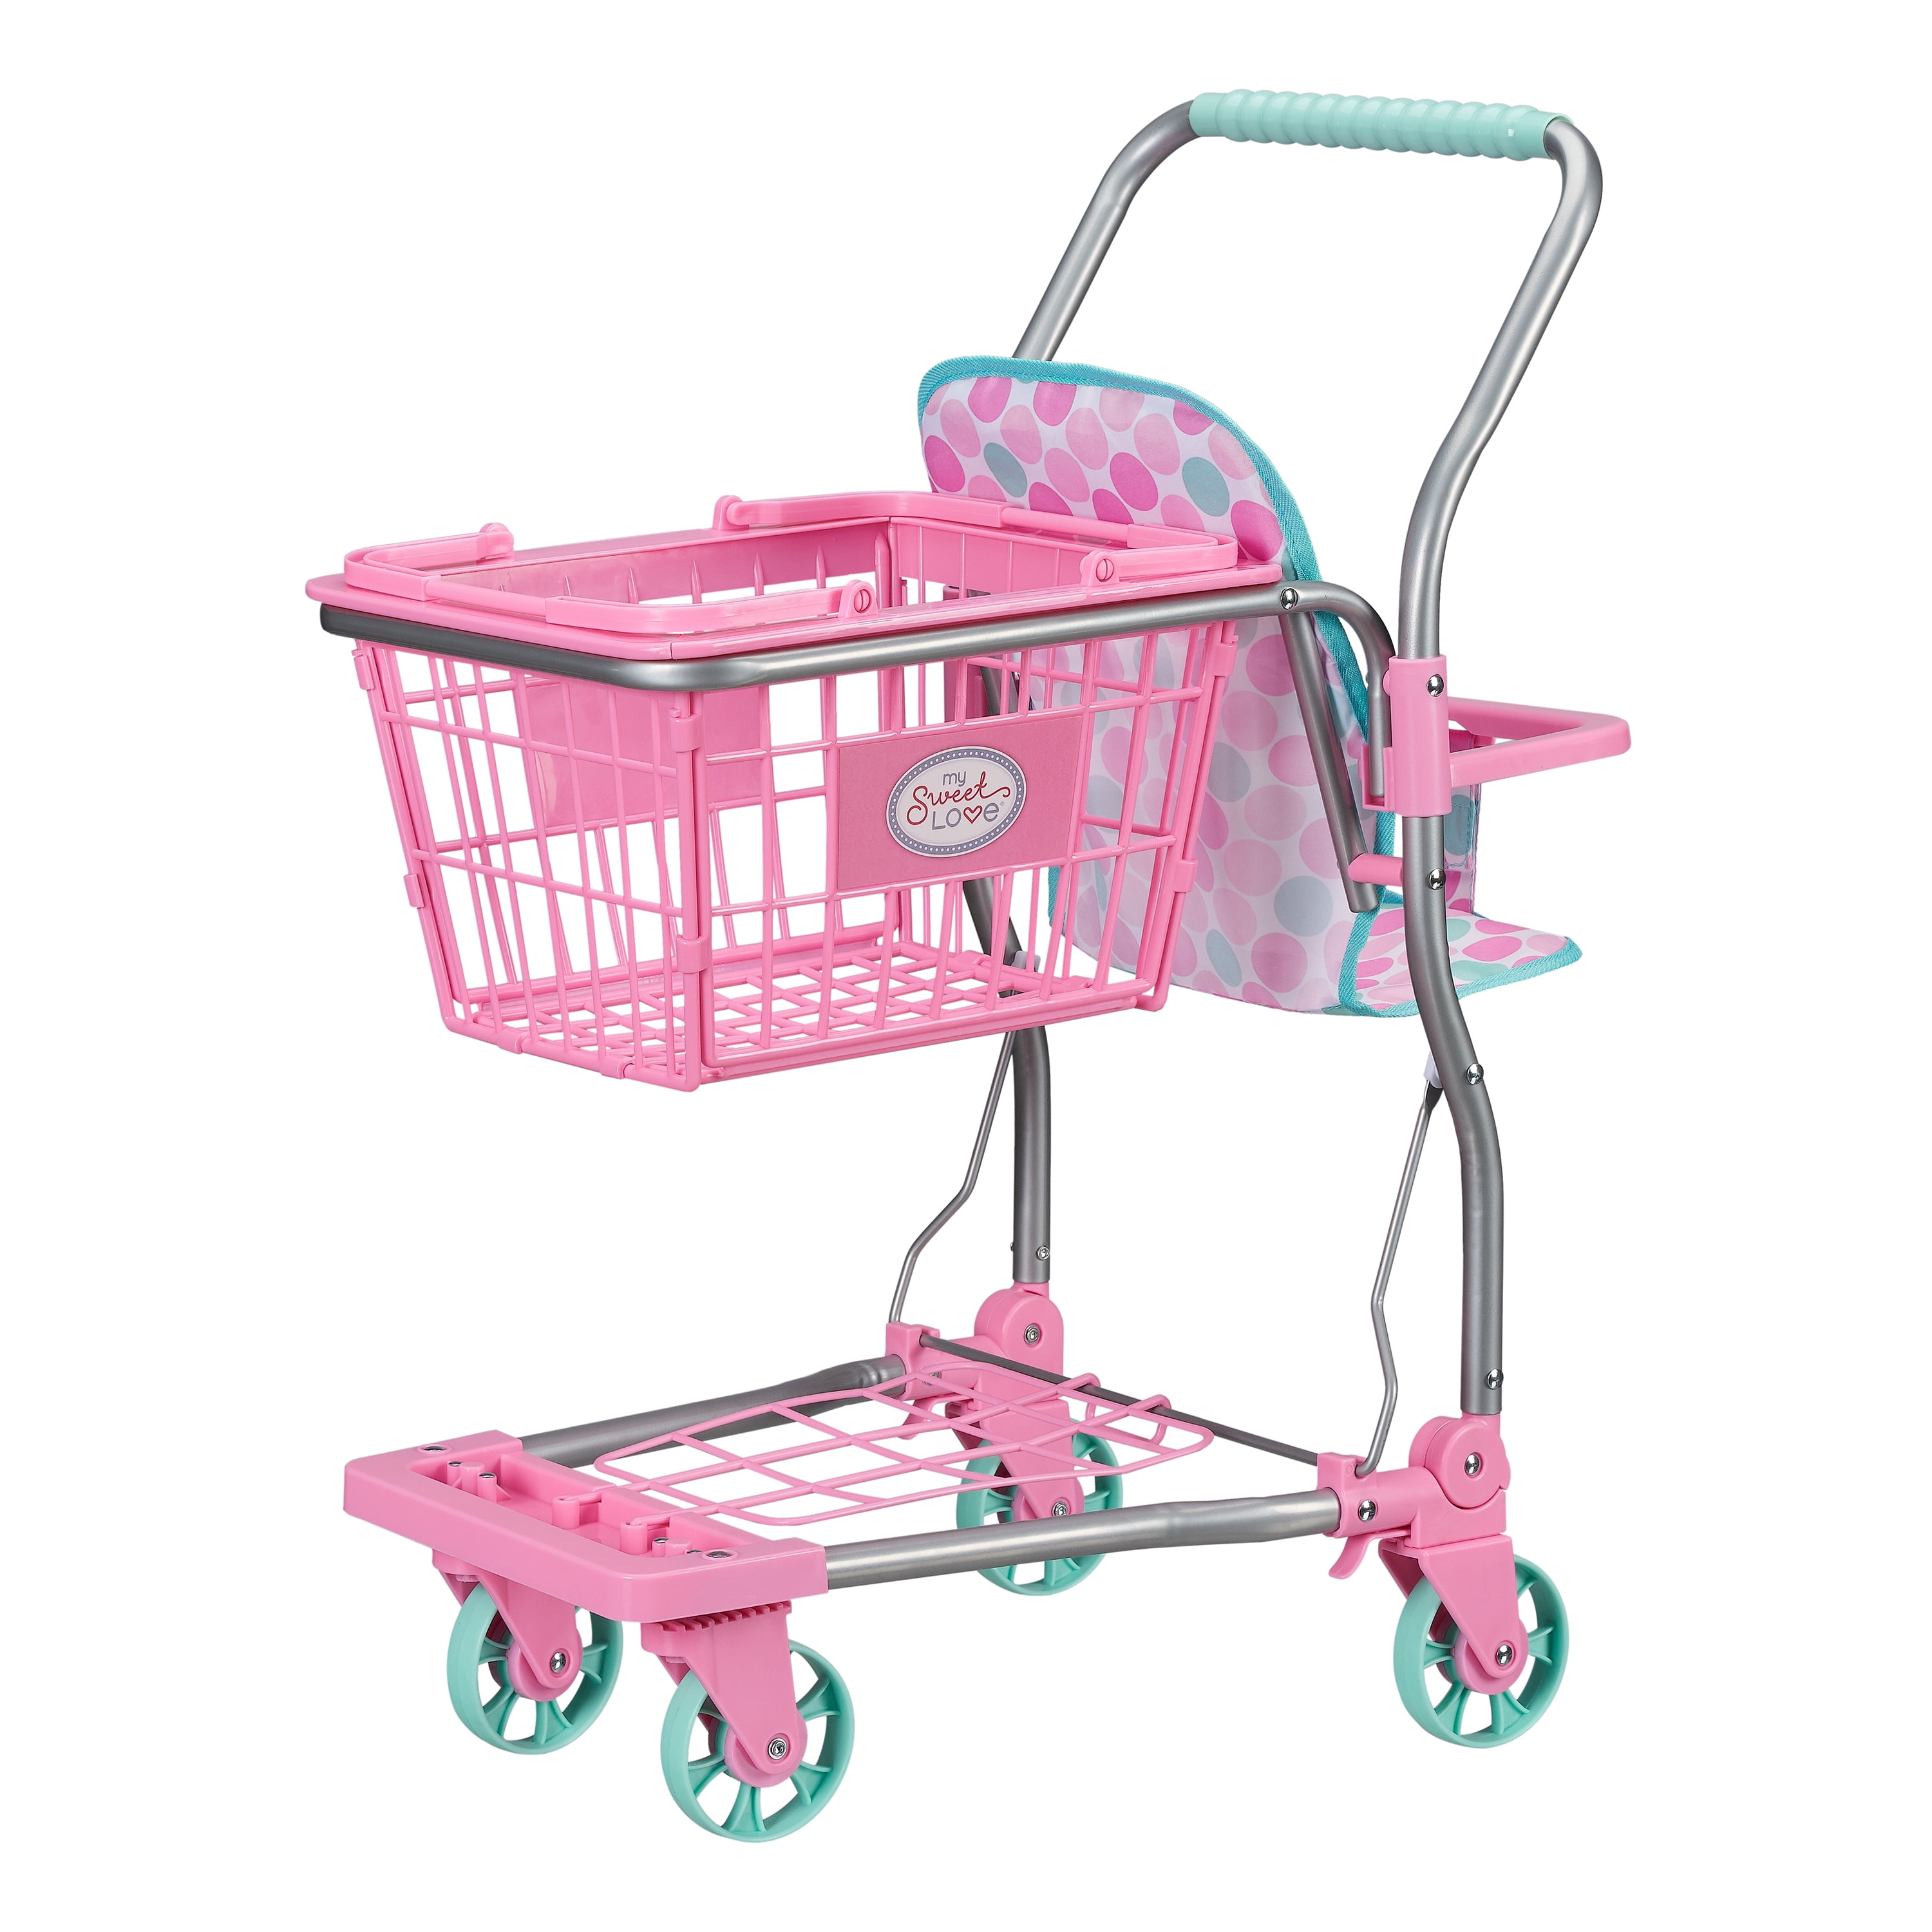 Pink Light Sound Play Kids Girl Musical Shopping Cart Grocery Food Playset Toy 